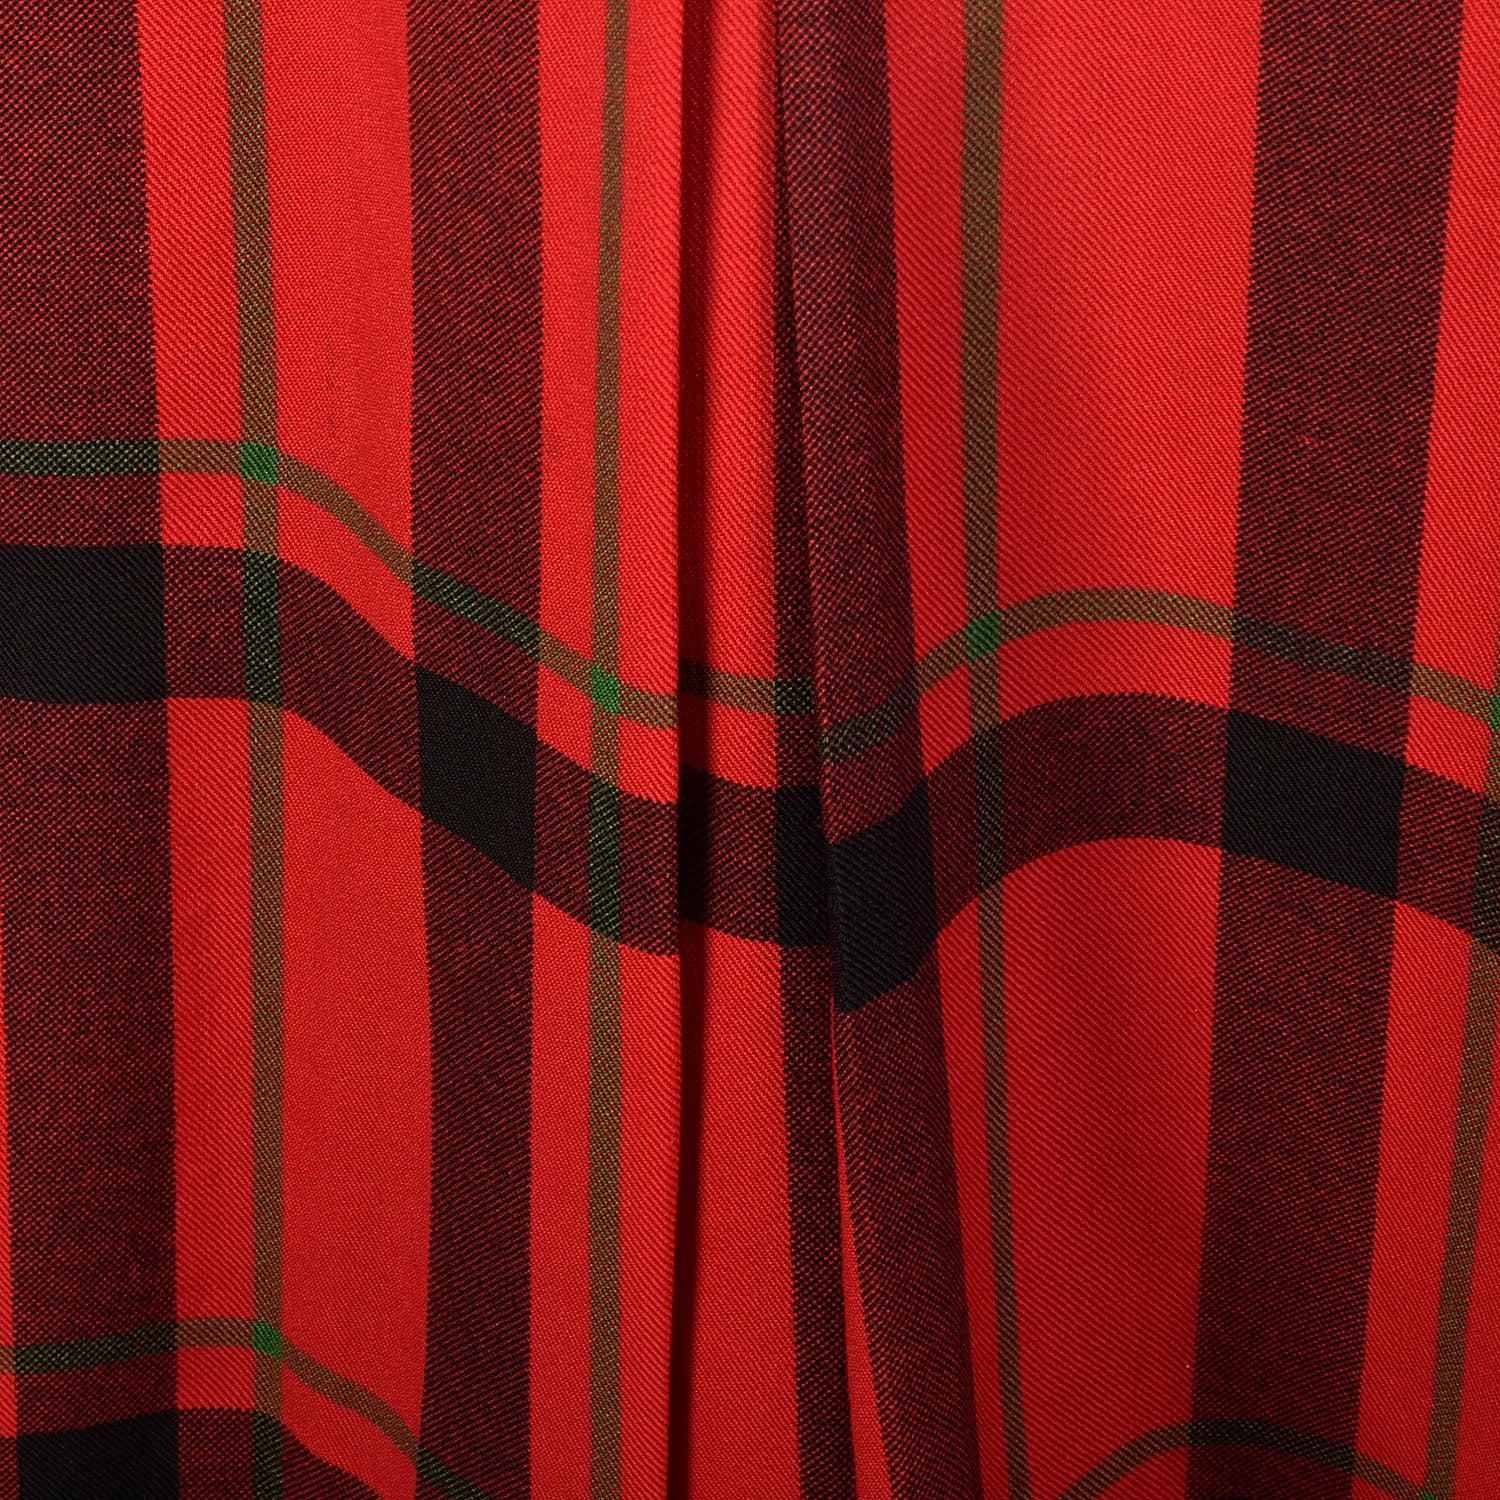 Small 1970s Yves Saint Laurent Rive Gauche Red Plaid Dress Double Breasted Long Sleeves